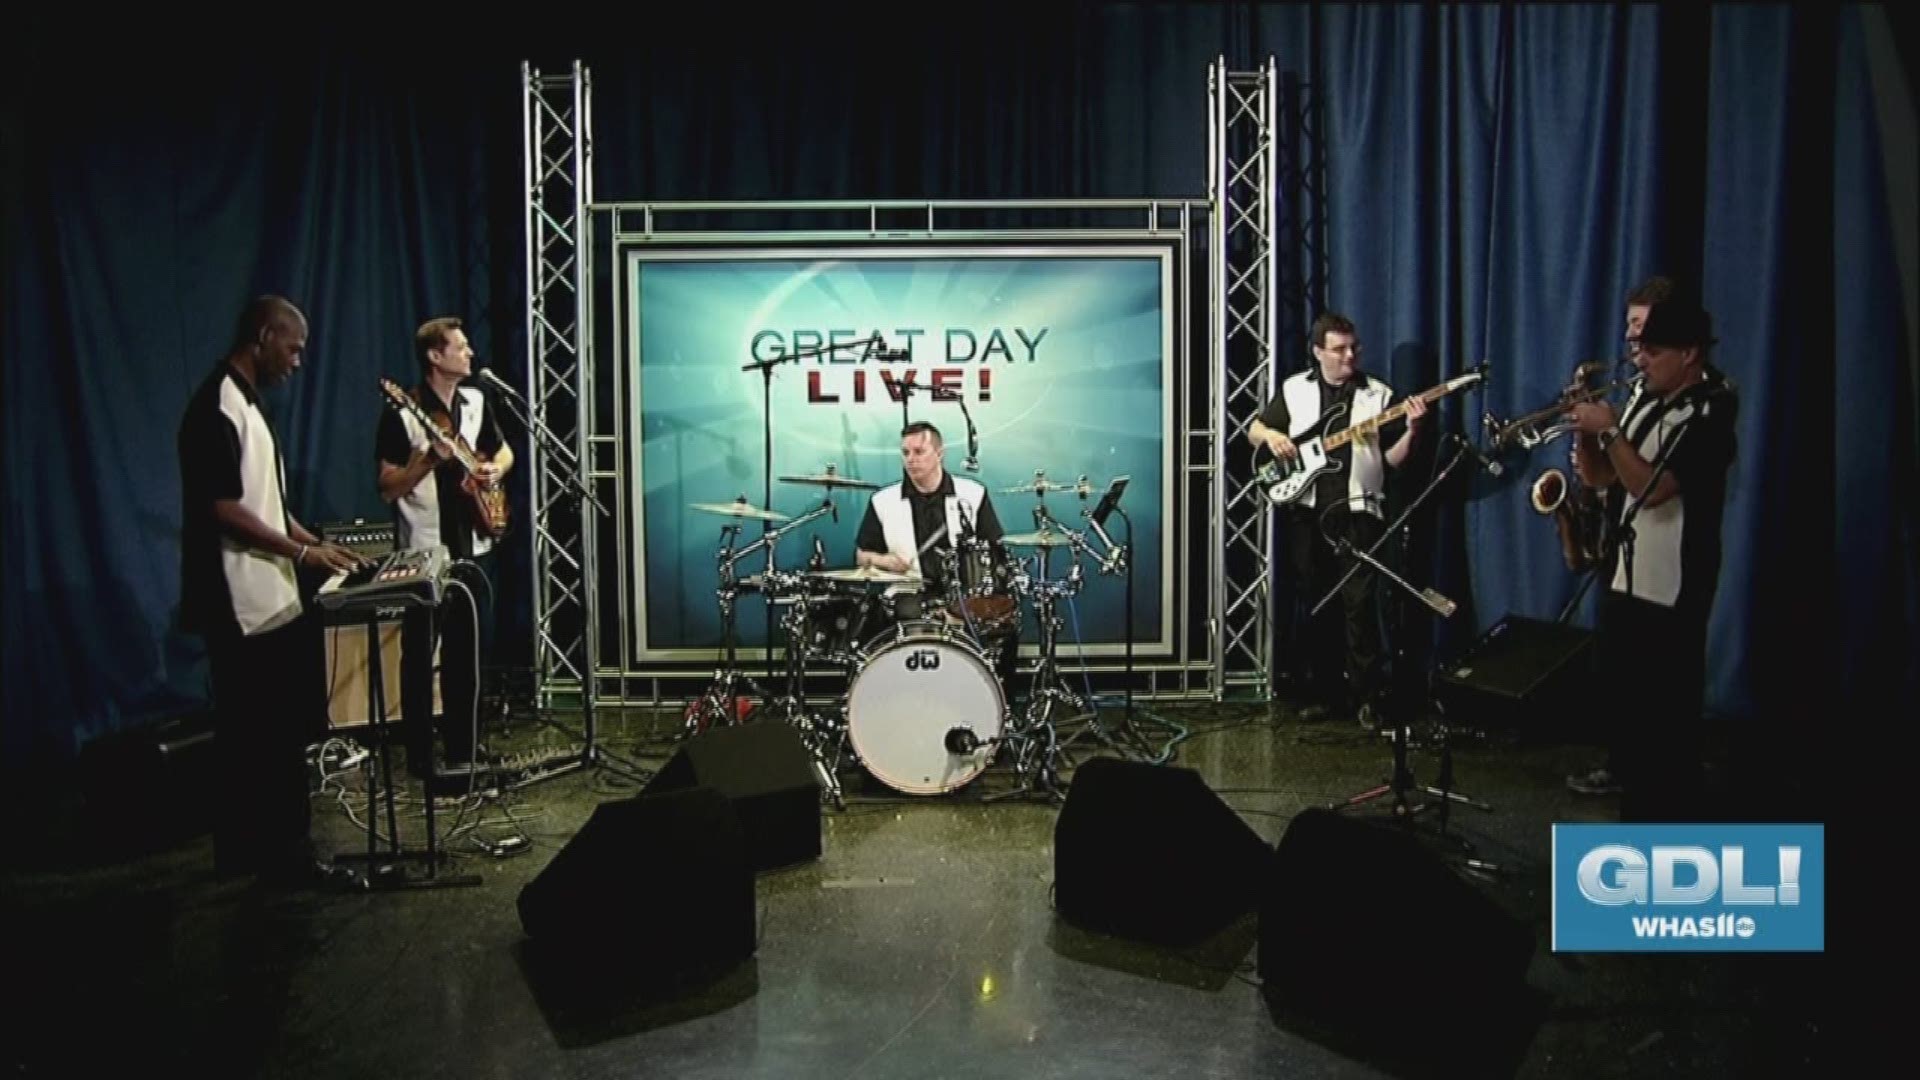 LOUISVILLE, Ky. — The band Big Black Cadillac stopped by Great Day Live to perform, along with Jenifer Frommeyer, who joined them to talk about The Dreamer's Ball on March 2, 2019. It’s a benefit for Dreams with Wings, which helps kids and adults with autism and a range of intellectual and developmental disabilities.